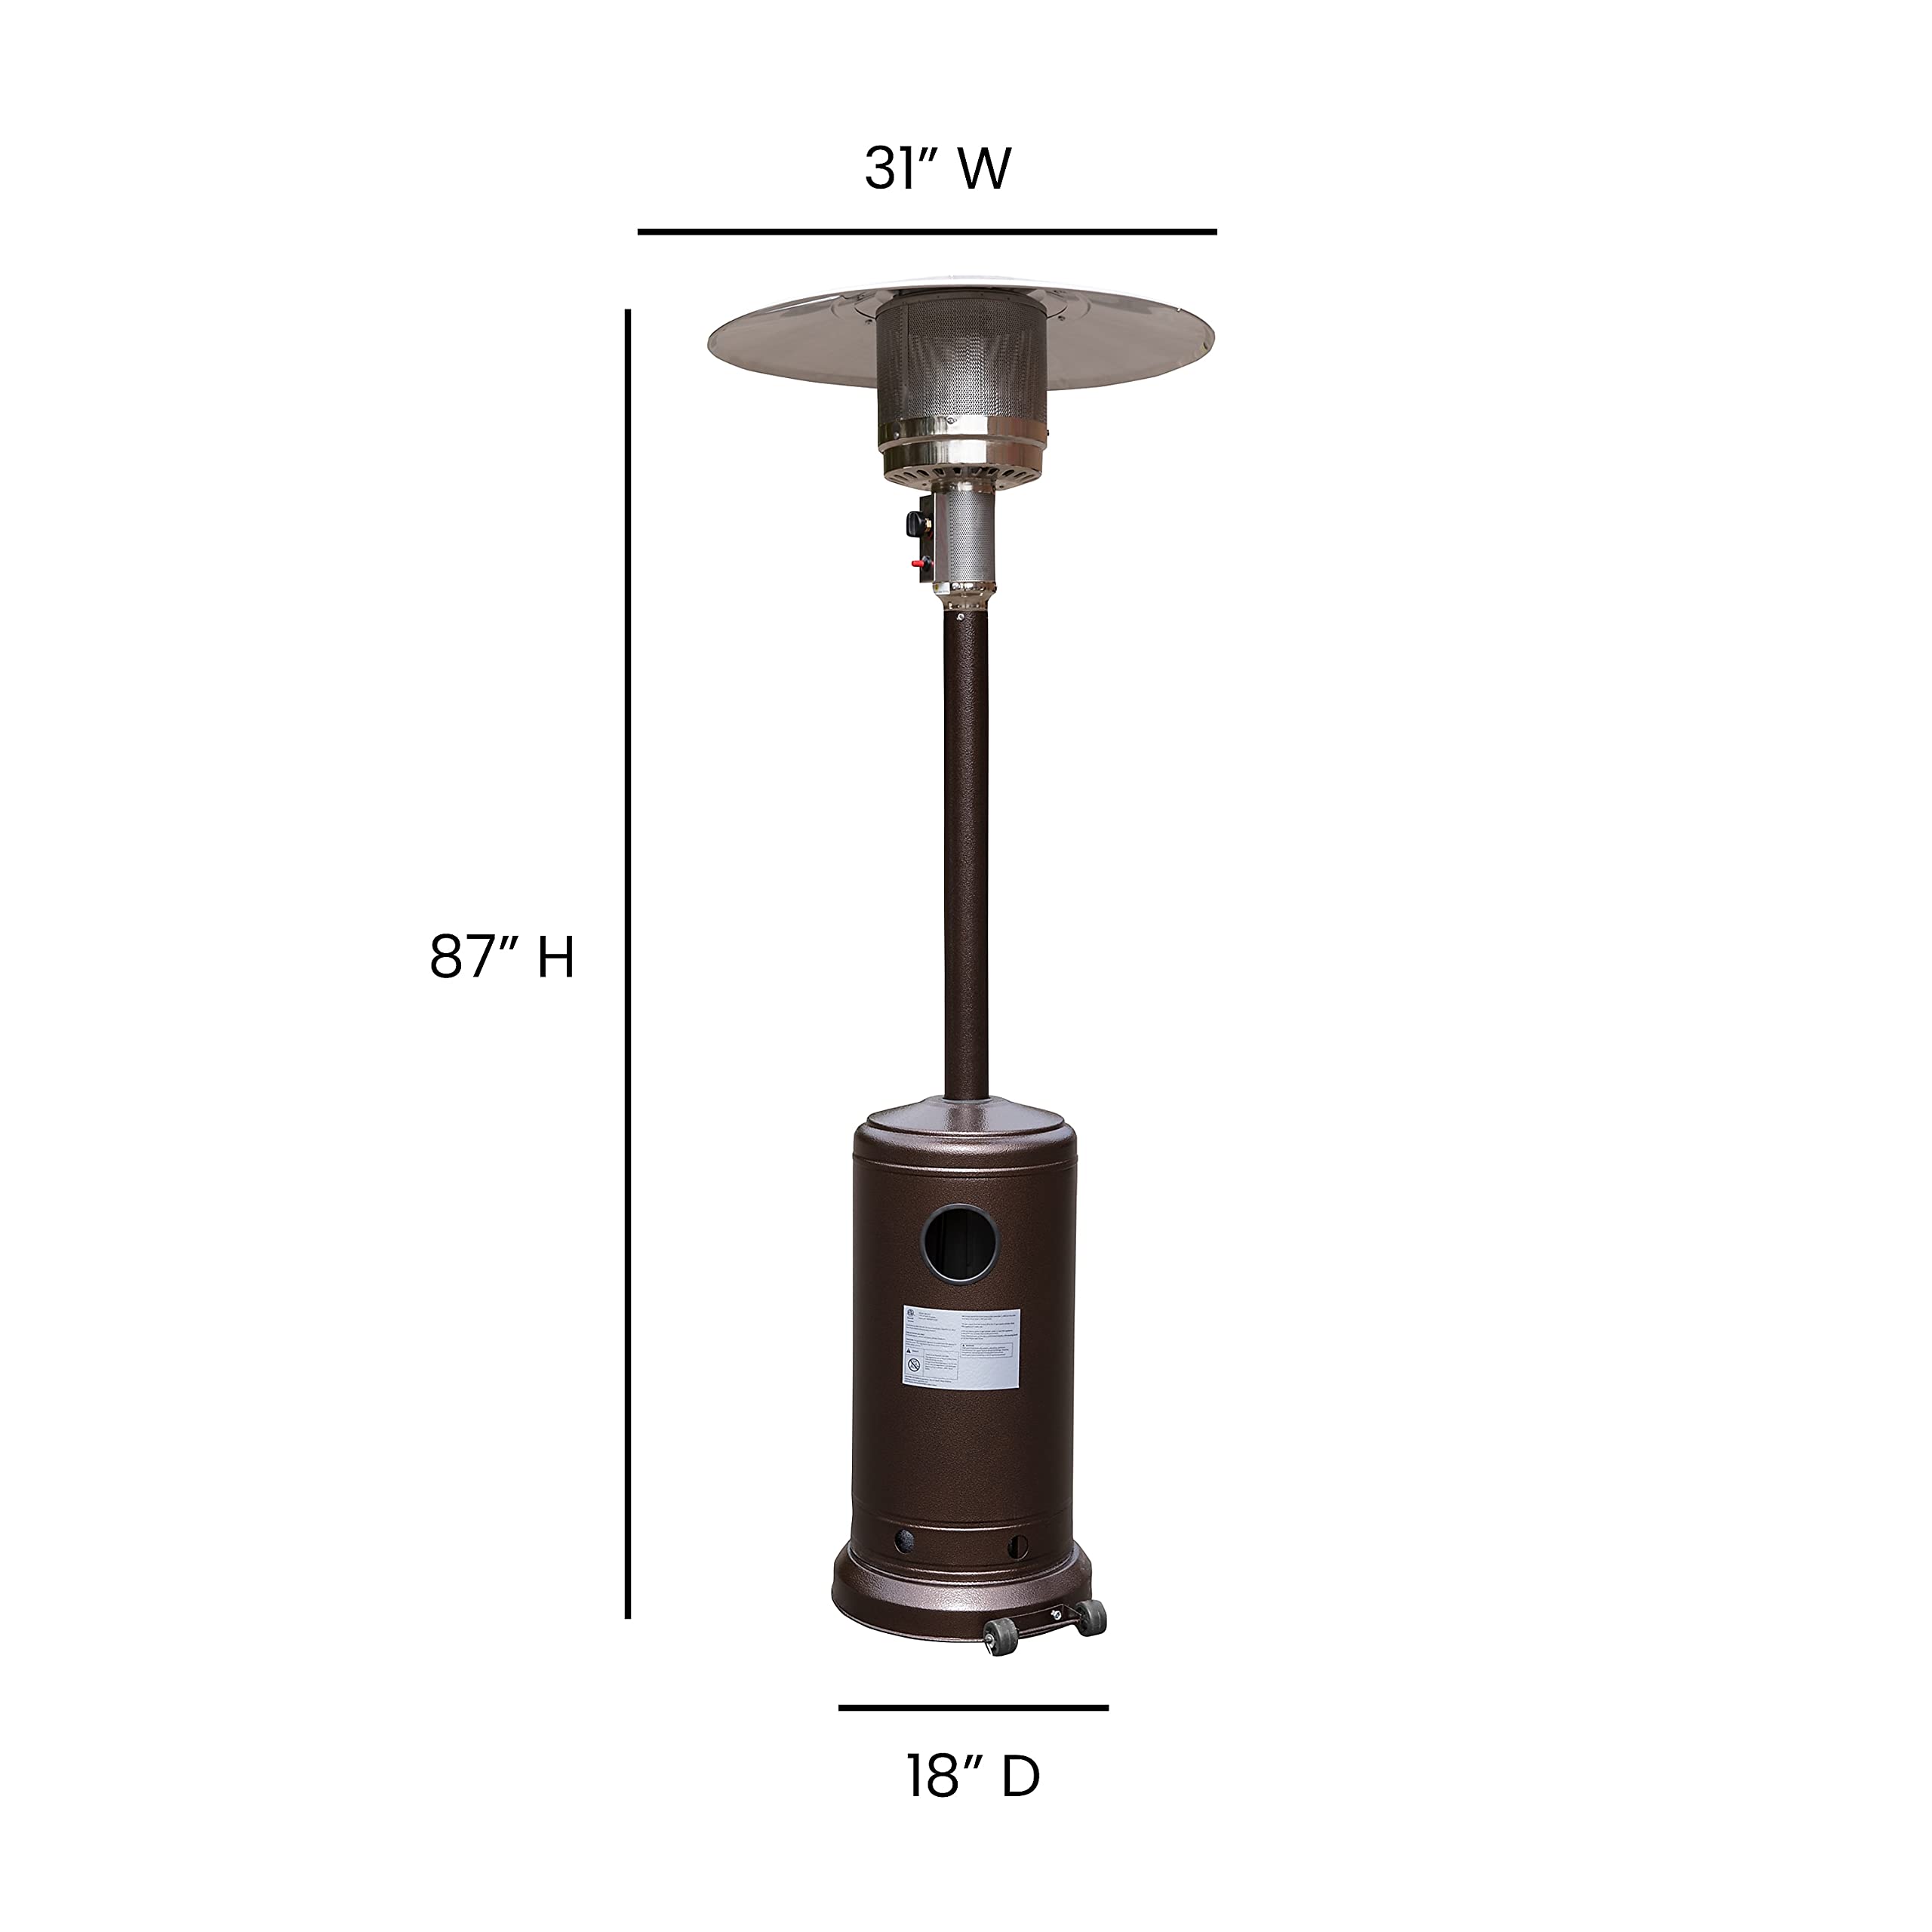 Flash Furniture Sol Patio Outdoor Heating-Bronze Stainless Steel 40,000 BTU Propane Heater with Wheels for Commercial & Residential Use-7.5 Feet Tall